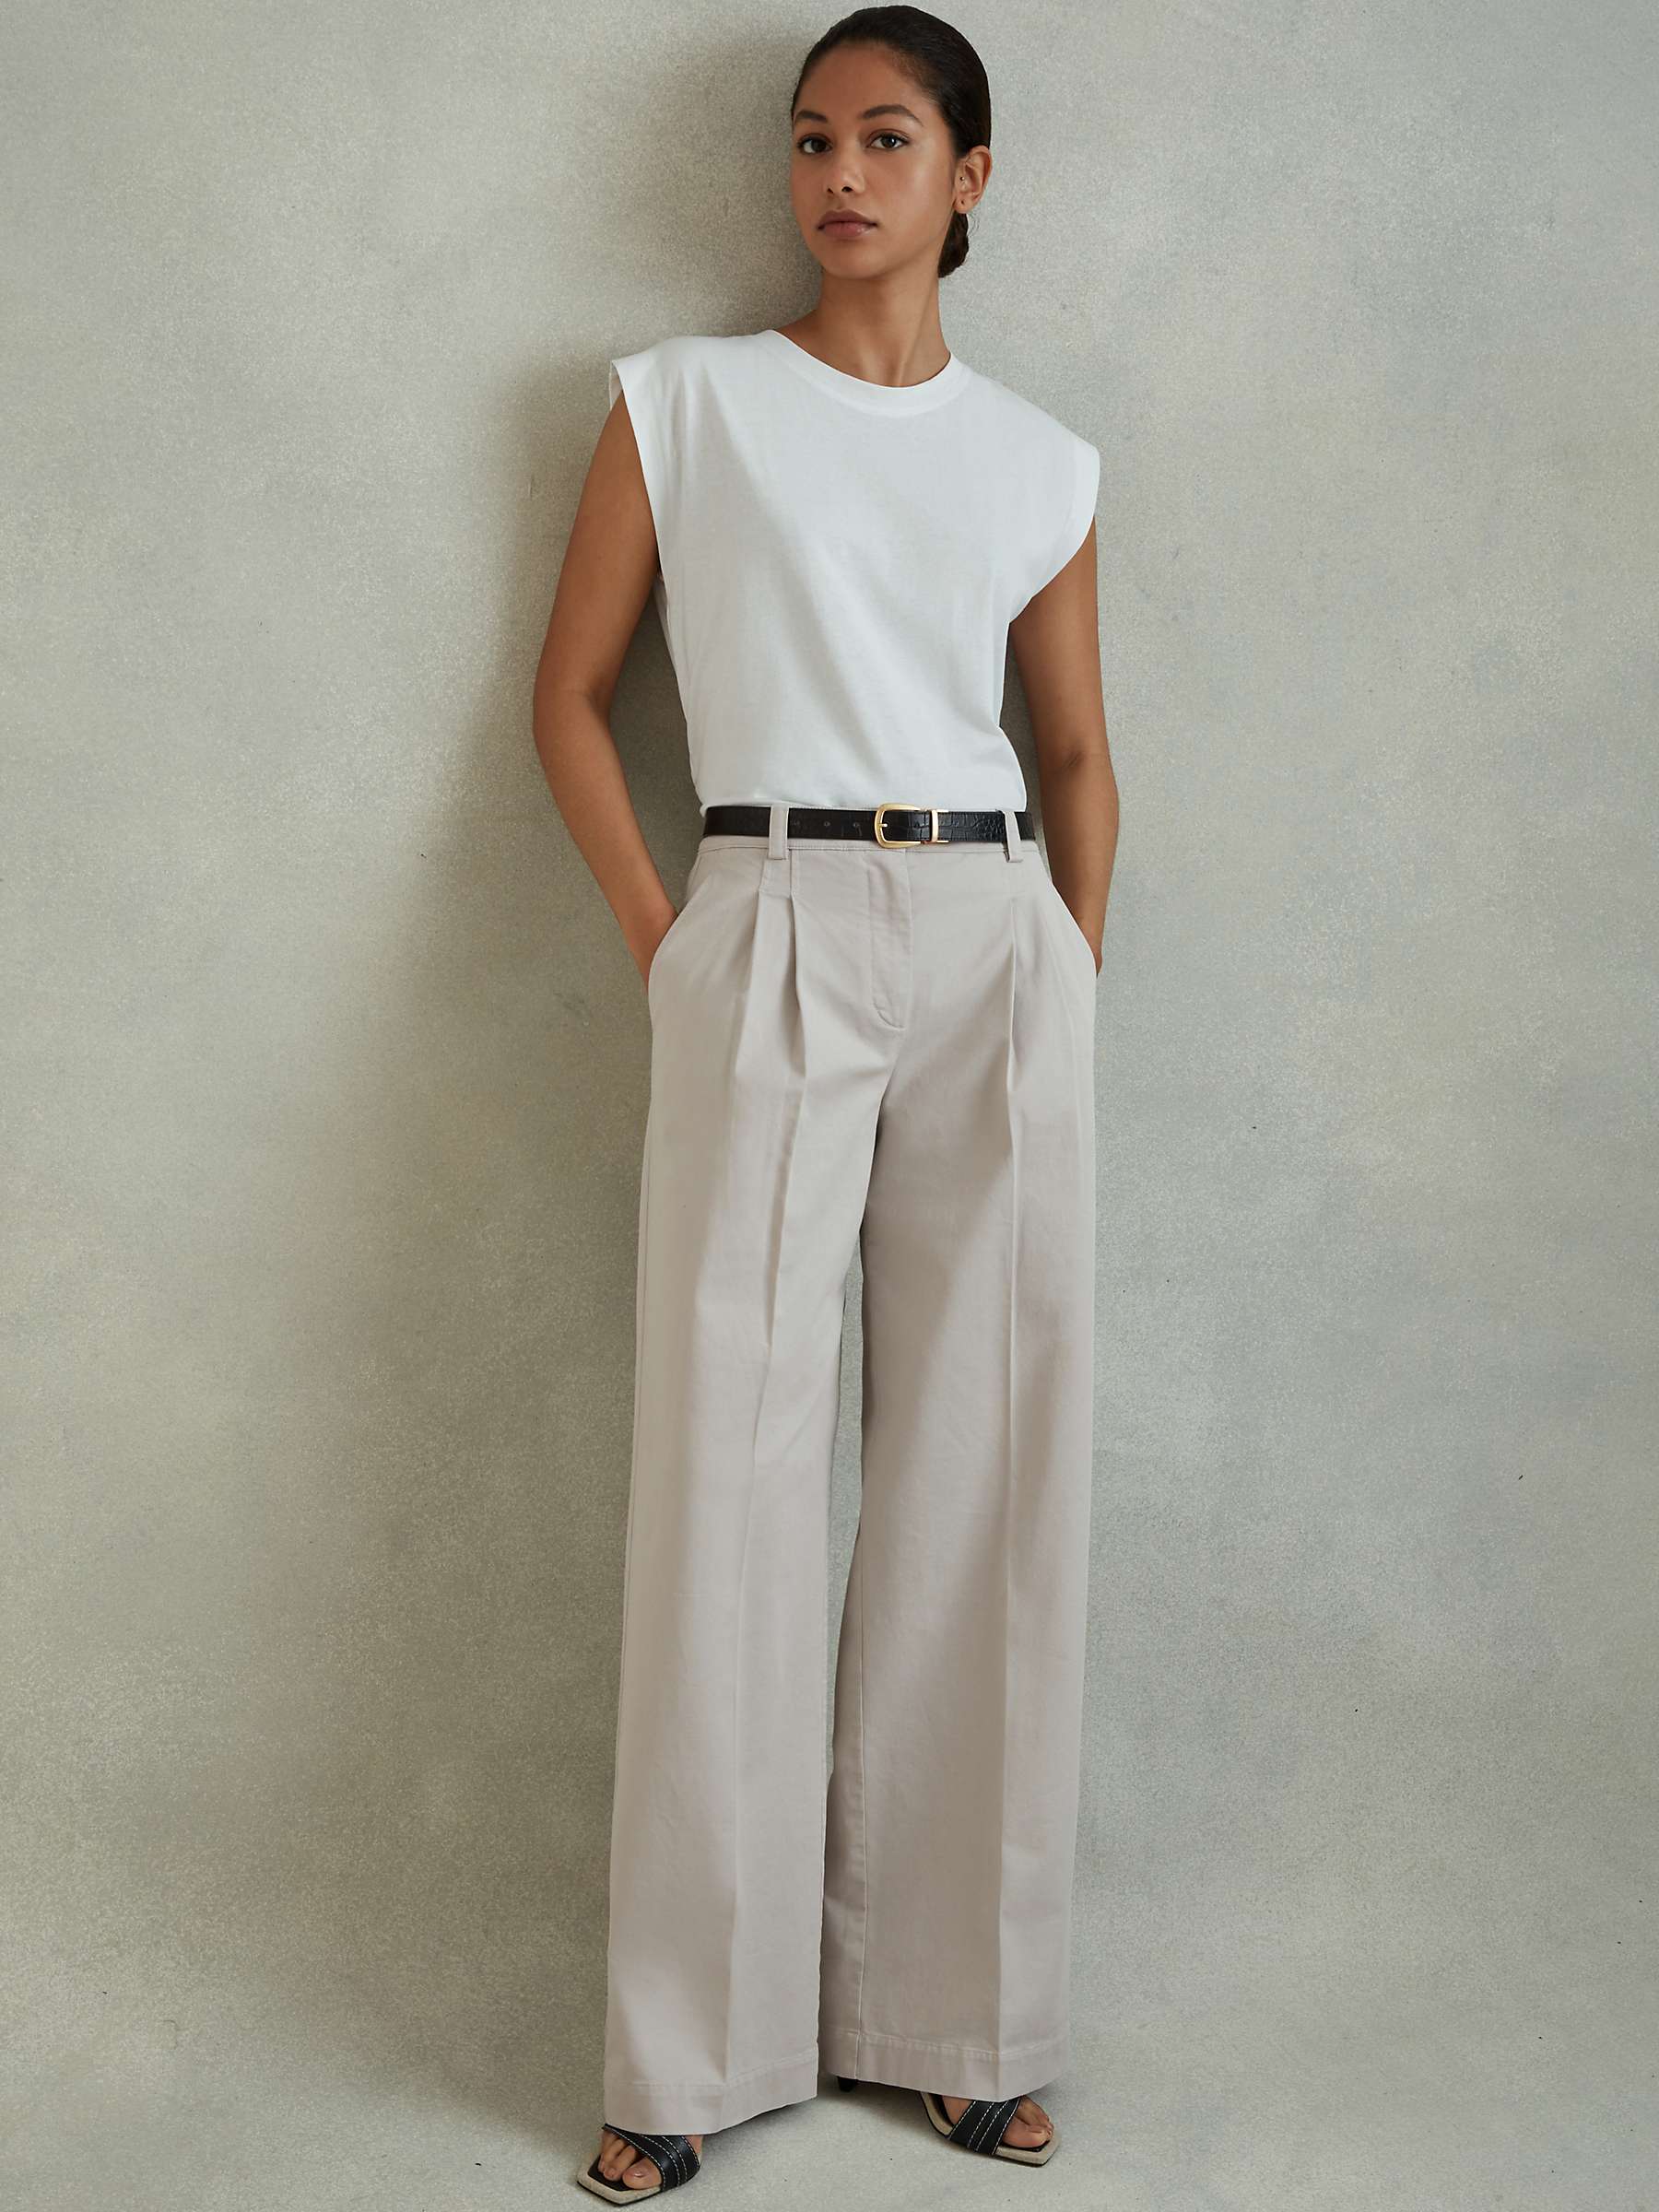 Buy Reiss Astrid Wide Leg Pleat Front Trousers Online at johnlewis.com